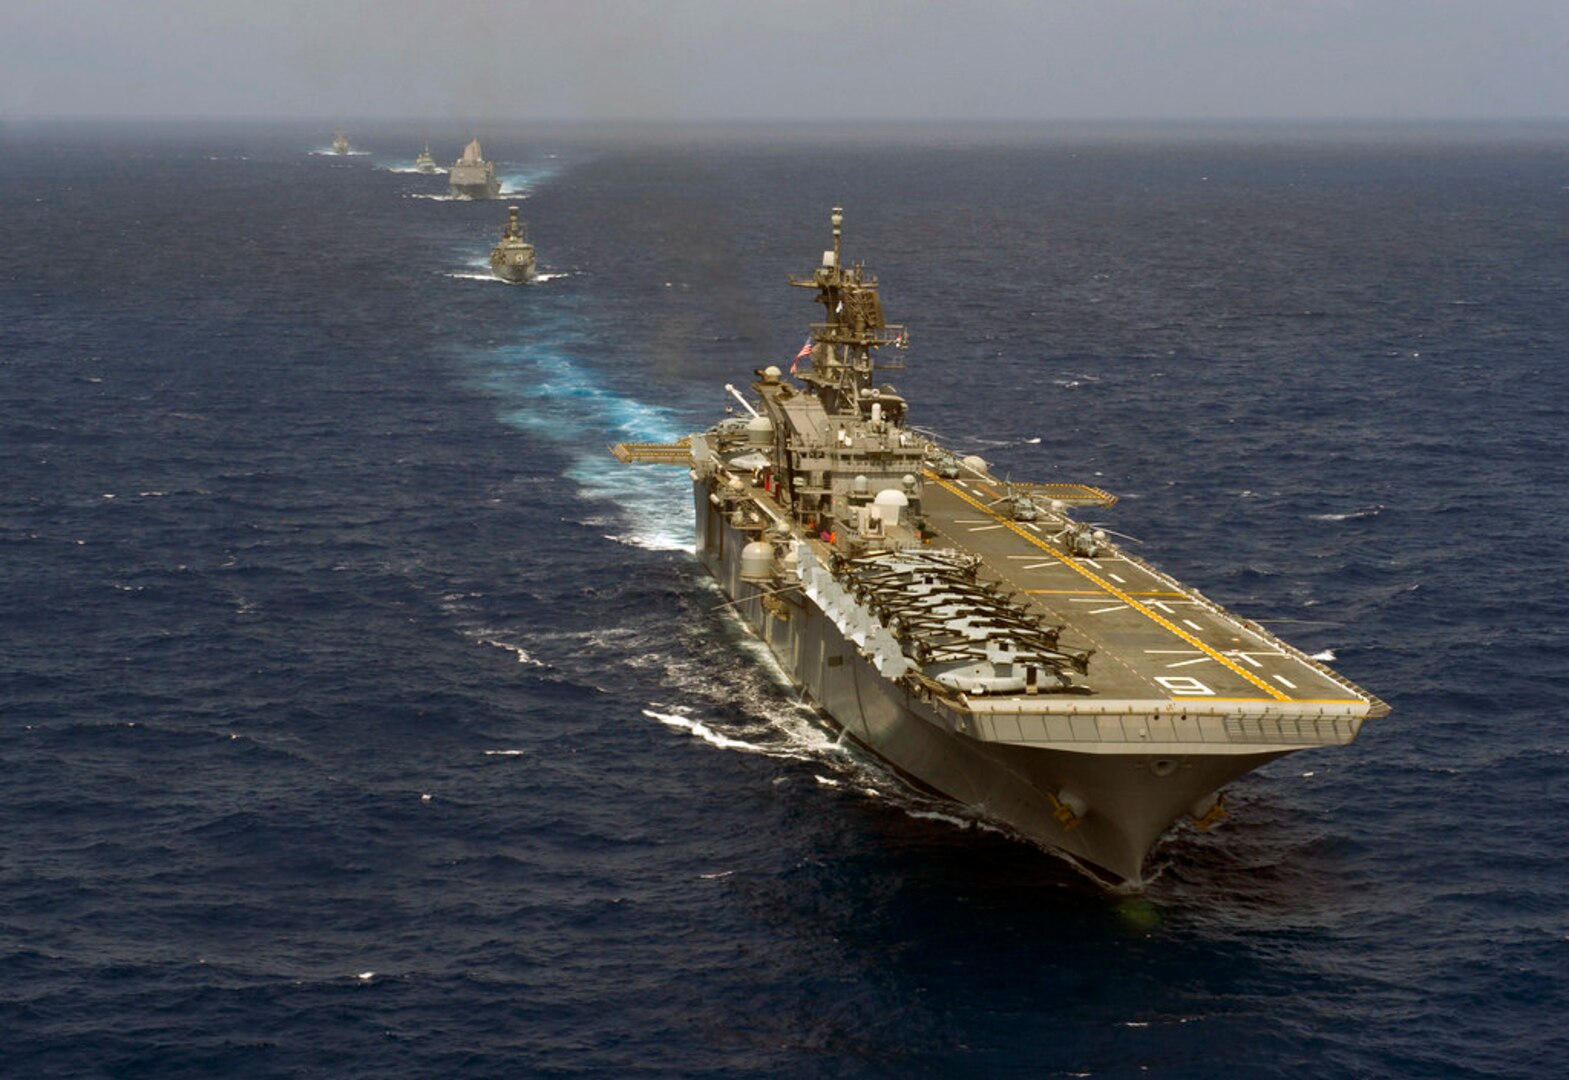 PACIFIC OCEAN (June 24, 2016) - The amphibious assault ship USS America (LHA 6), Royal Canadian Navy frigate Her Majesty's Canadian Ship Vancouver (FFH 331), Chilean Navy frigate CNS Cochrane (FF 05), amphibious transport dock ship USS San Diego (LPD 22), and guided-missile destroyer USS Howard (DDG 83) steam in formation while transiting to Rim of the Pacific 2016. Twenty-six nations, more than 40 ships and submarines, more than 200 aircraft and 25,000 personnel are participating in RIMPAC from June 30 to Aug. 4, in and around the Hawaiian Islands and Southern California. The world's largest international maritime exercise, RIMPAC provides a unique training opportunity that helps participants foster and sustain the cooperative relationships that are critical to ensuring the safety of sea lanes and security on the world's oceans. RIMPAC 2016 is the 25th exercise in the series that began in 1971. 